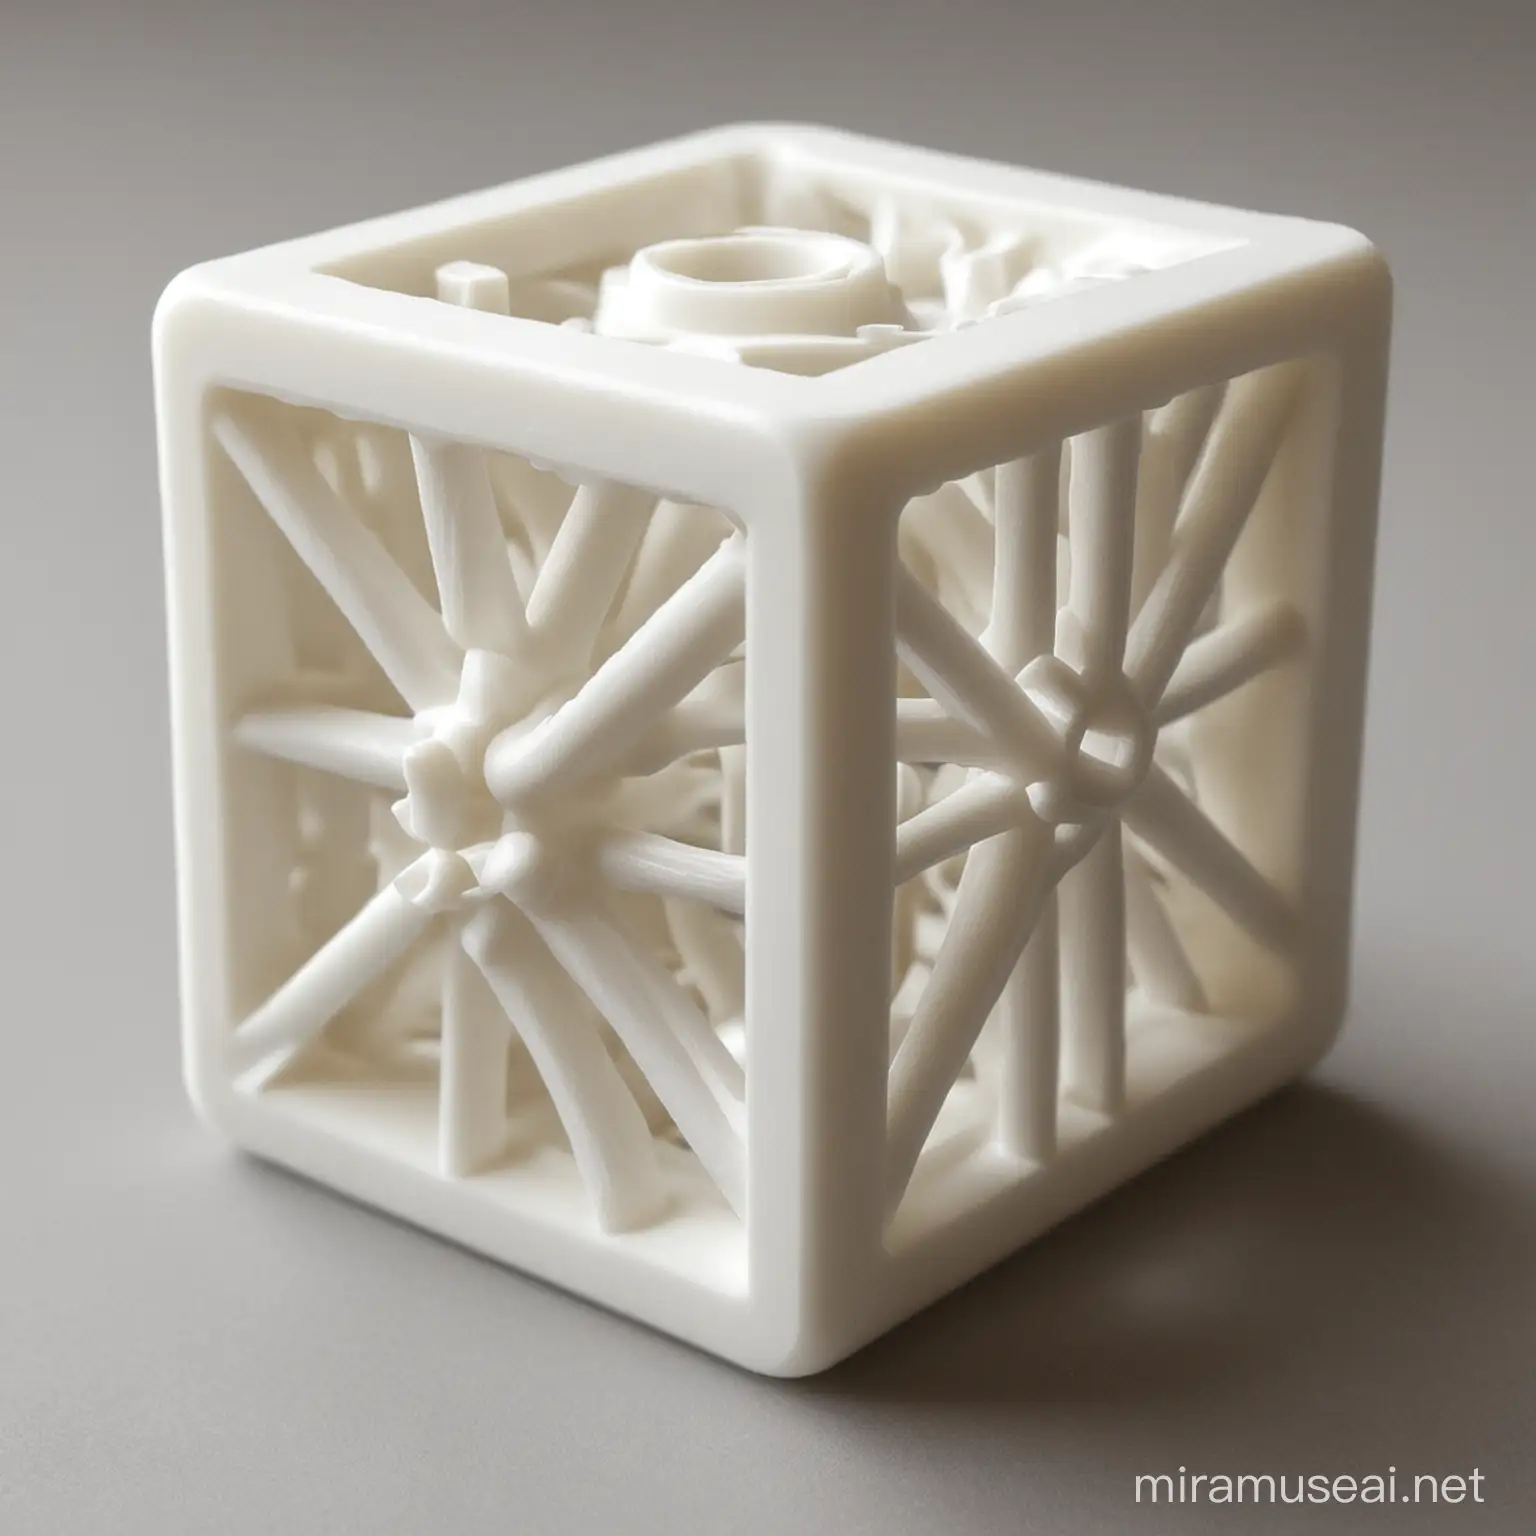 3D printed Object